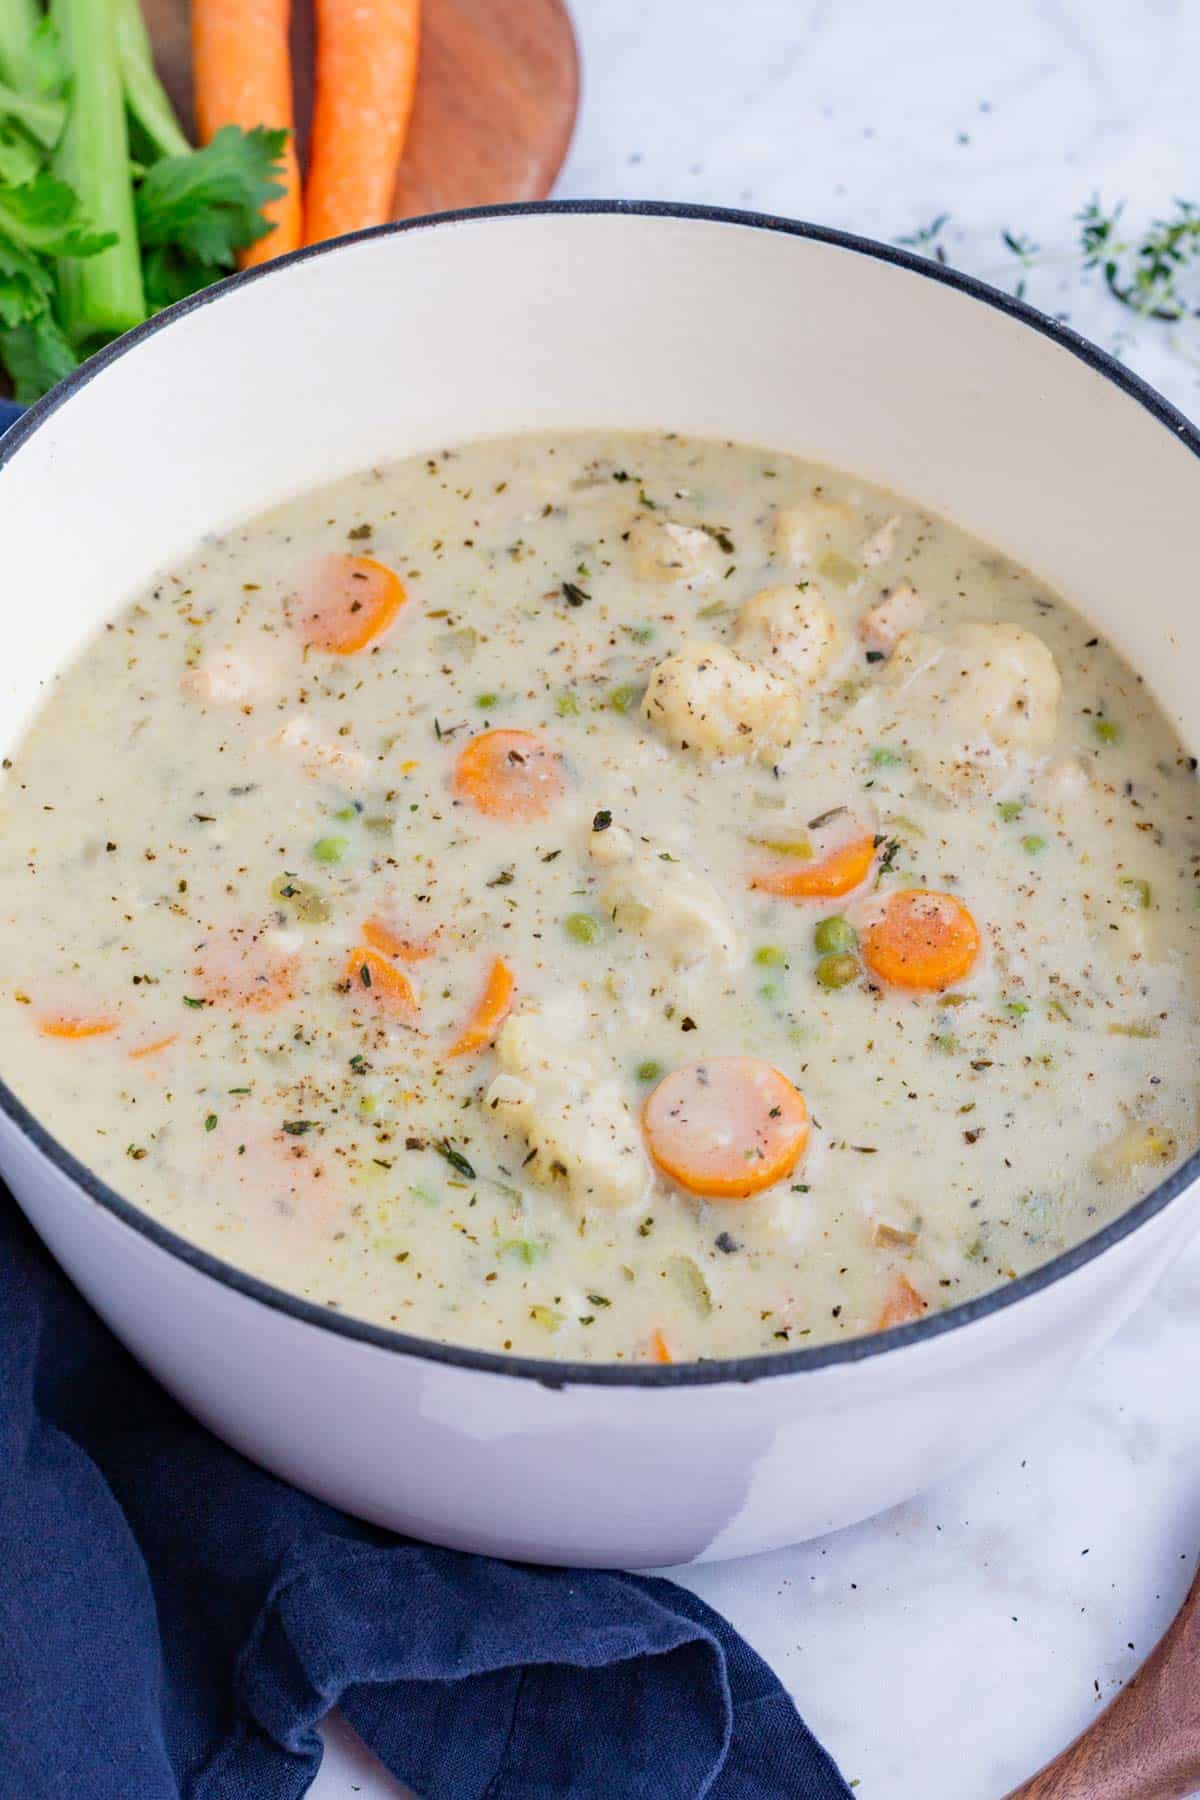 Chicken and dumpling soup is a creamy, homemade Fall recipe.